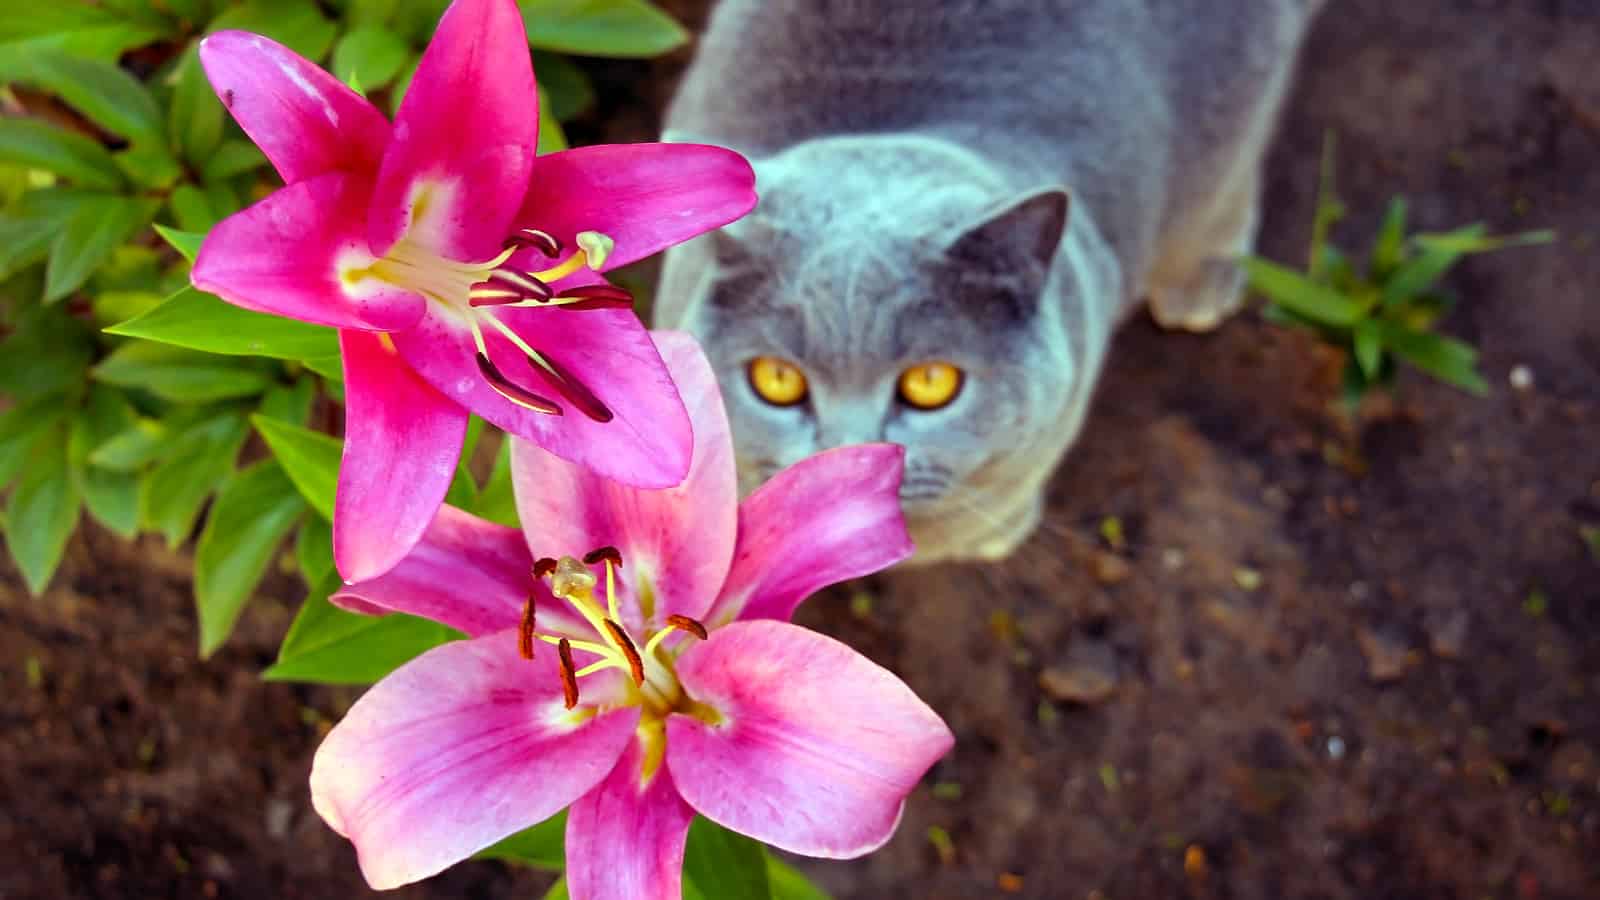 Gray cat in the lily flower garden. The Scottish cat breed loves to walk and eat fresh pink large flowers.